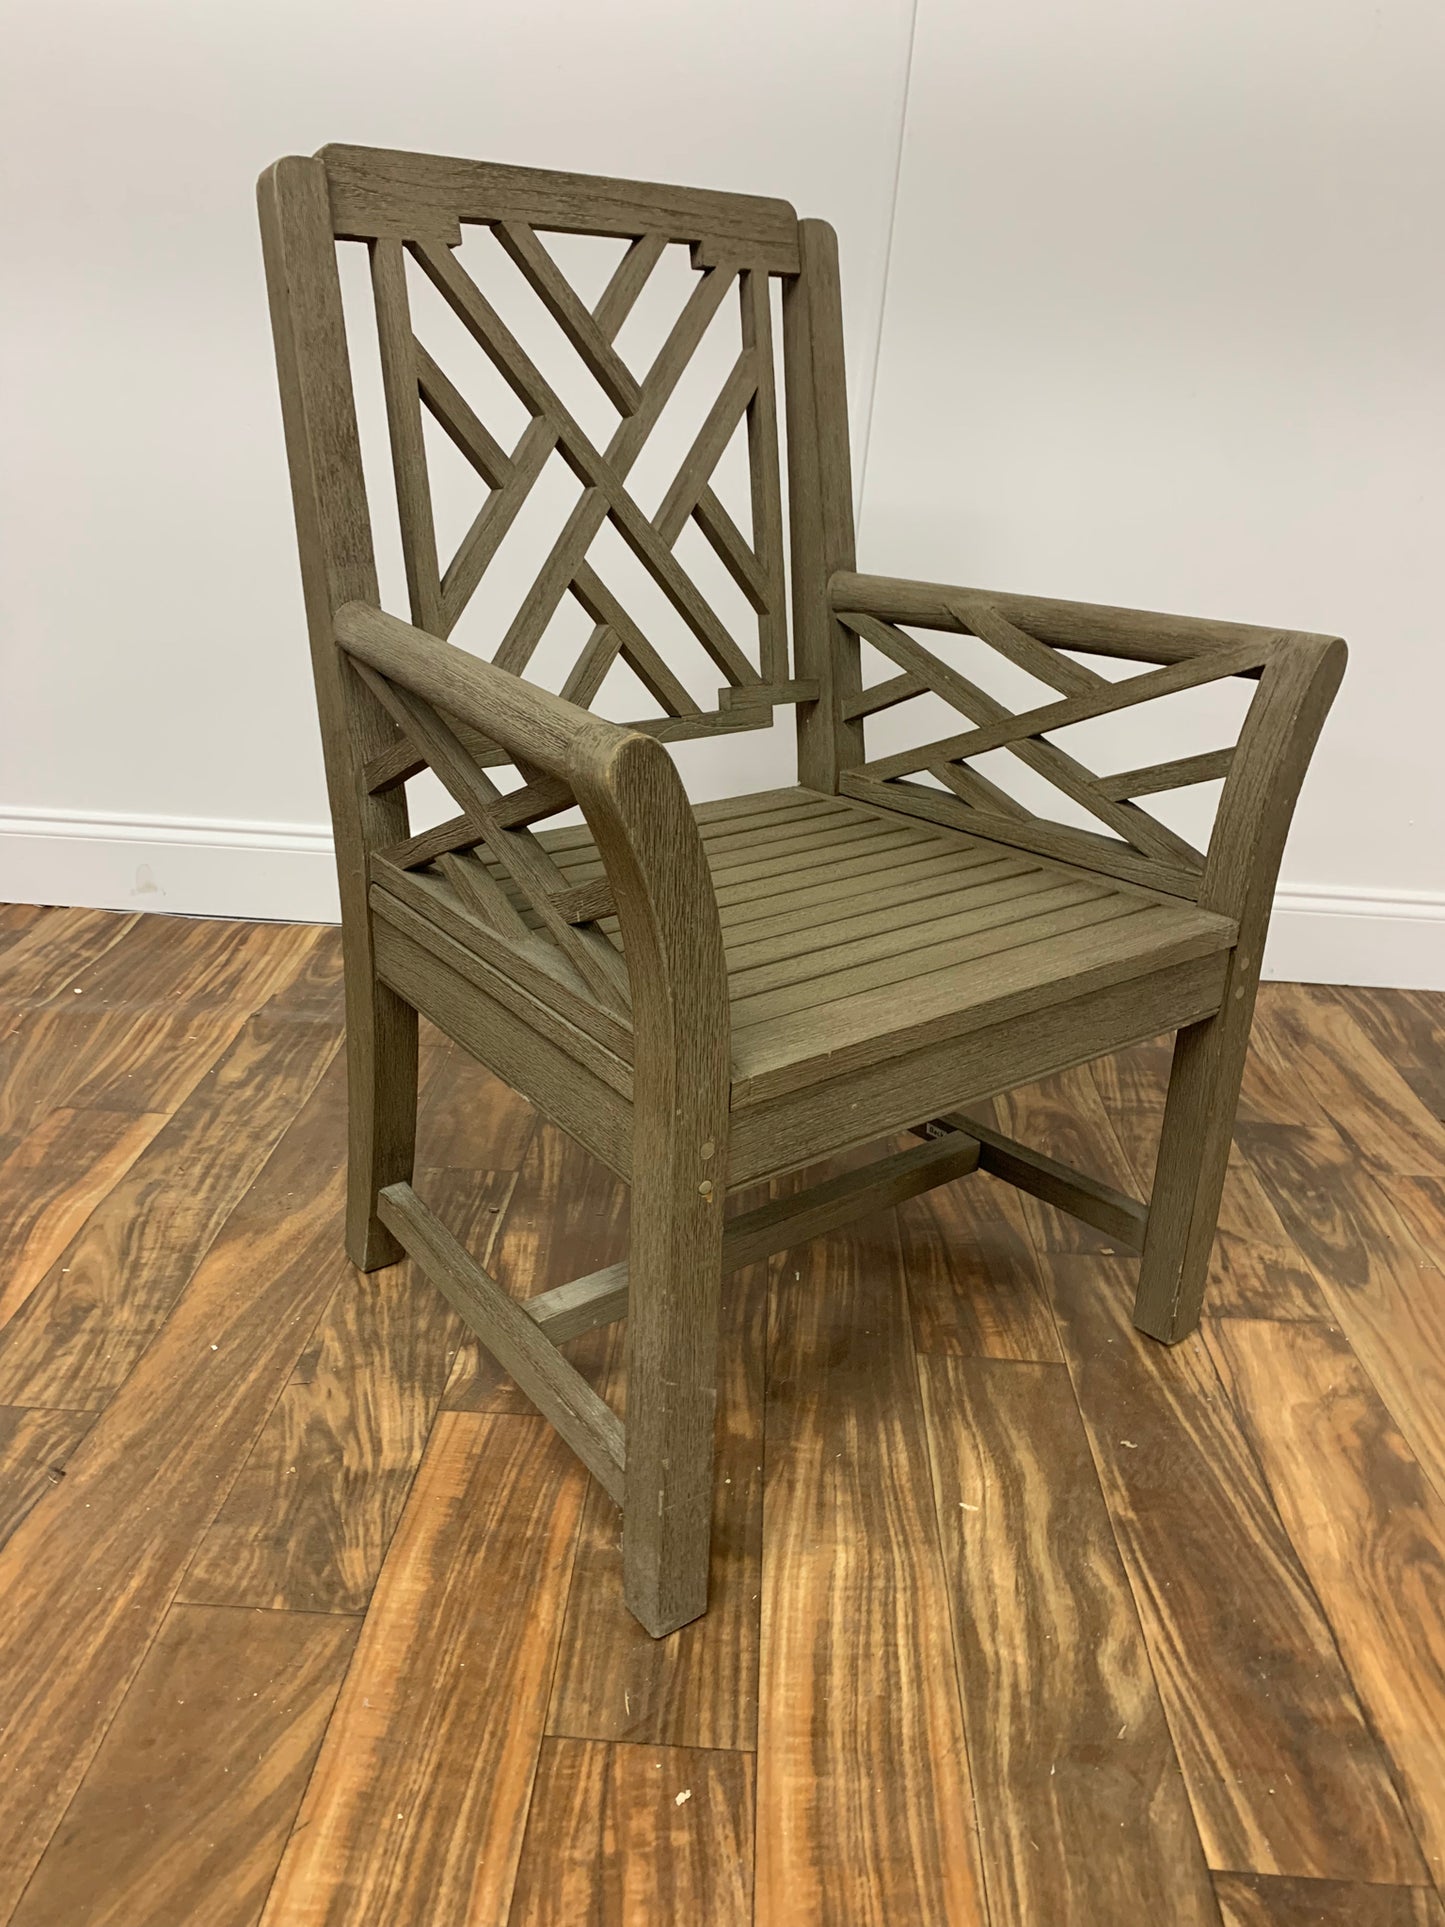 GRAY WOODEN OUTDOOR CHAIR